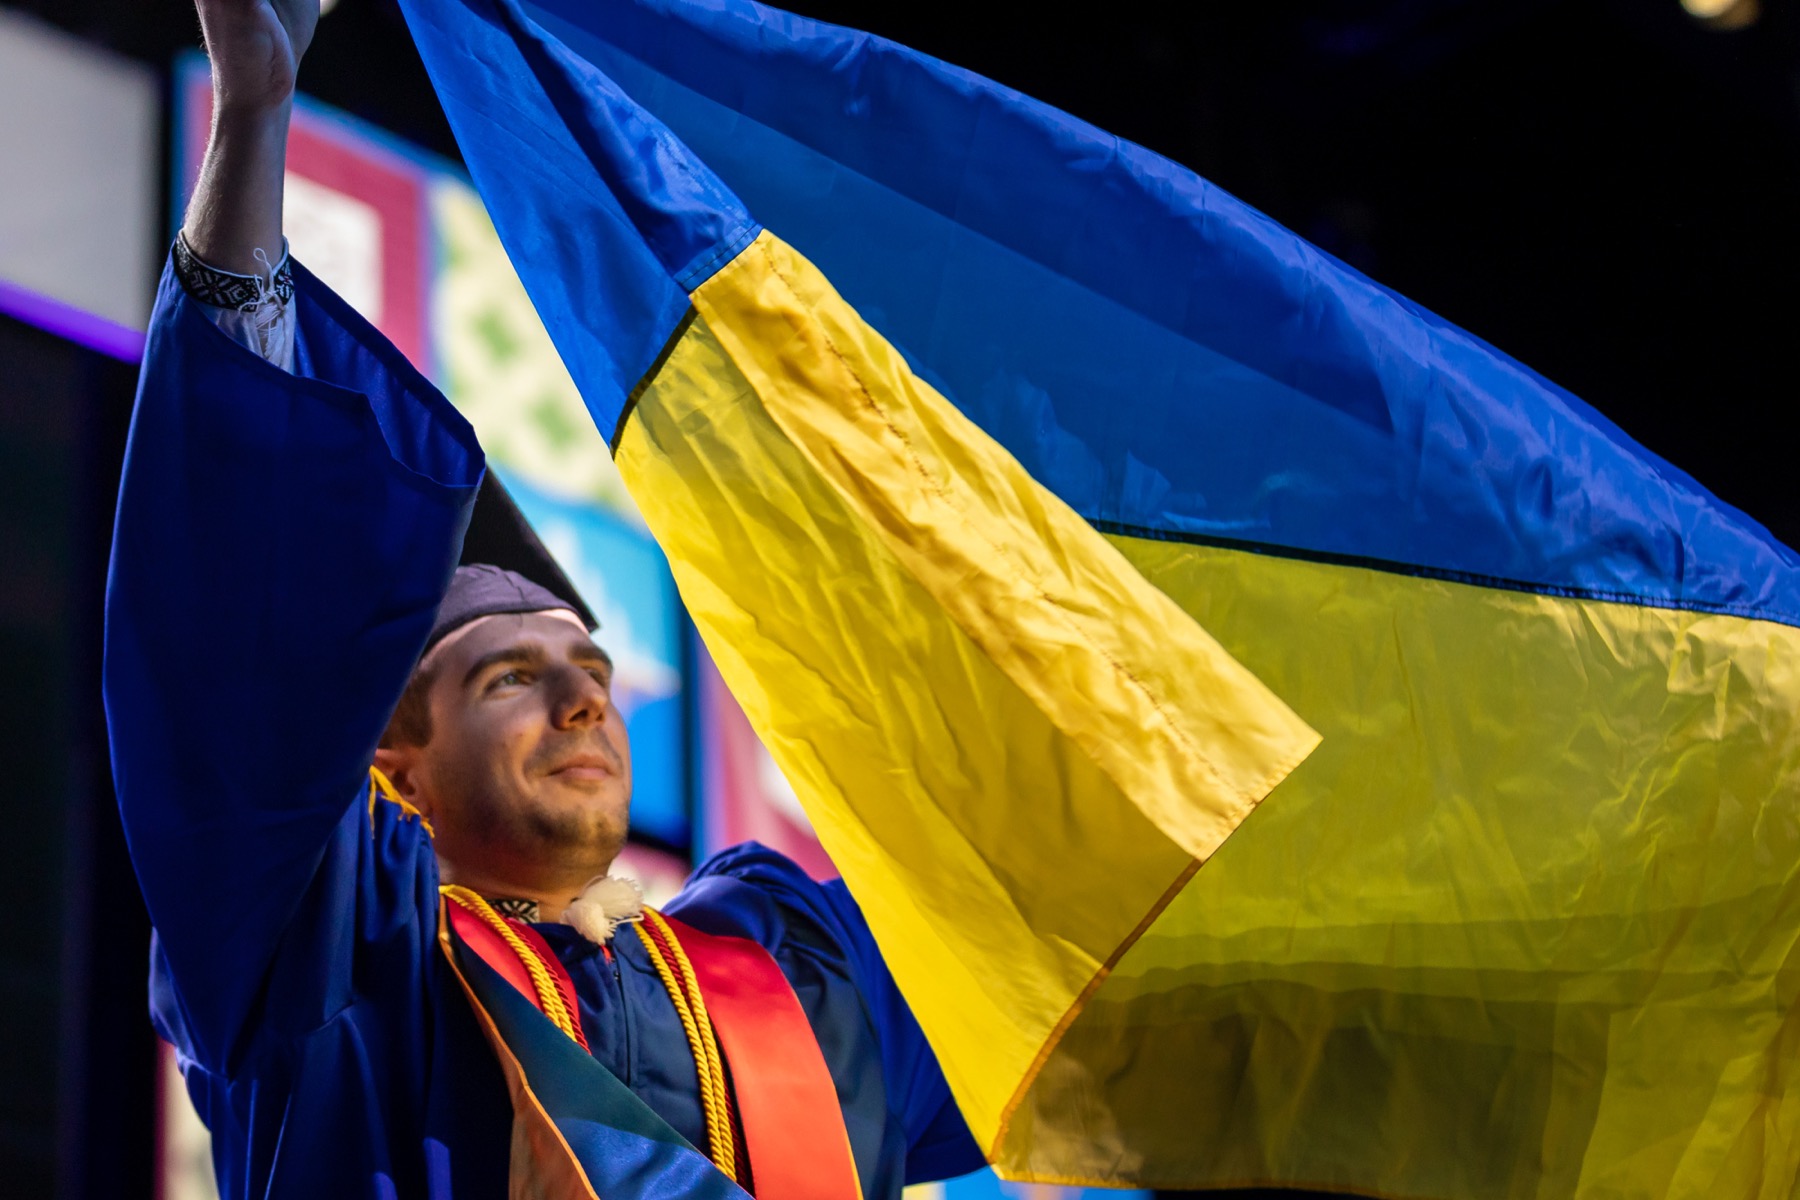 In a show of solidarity, a graduate unfurled a Ukrainian flag on stage.